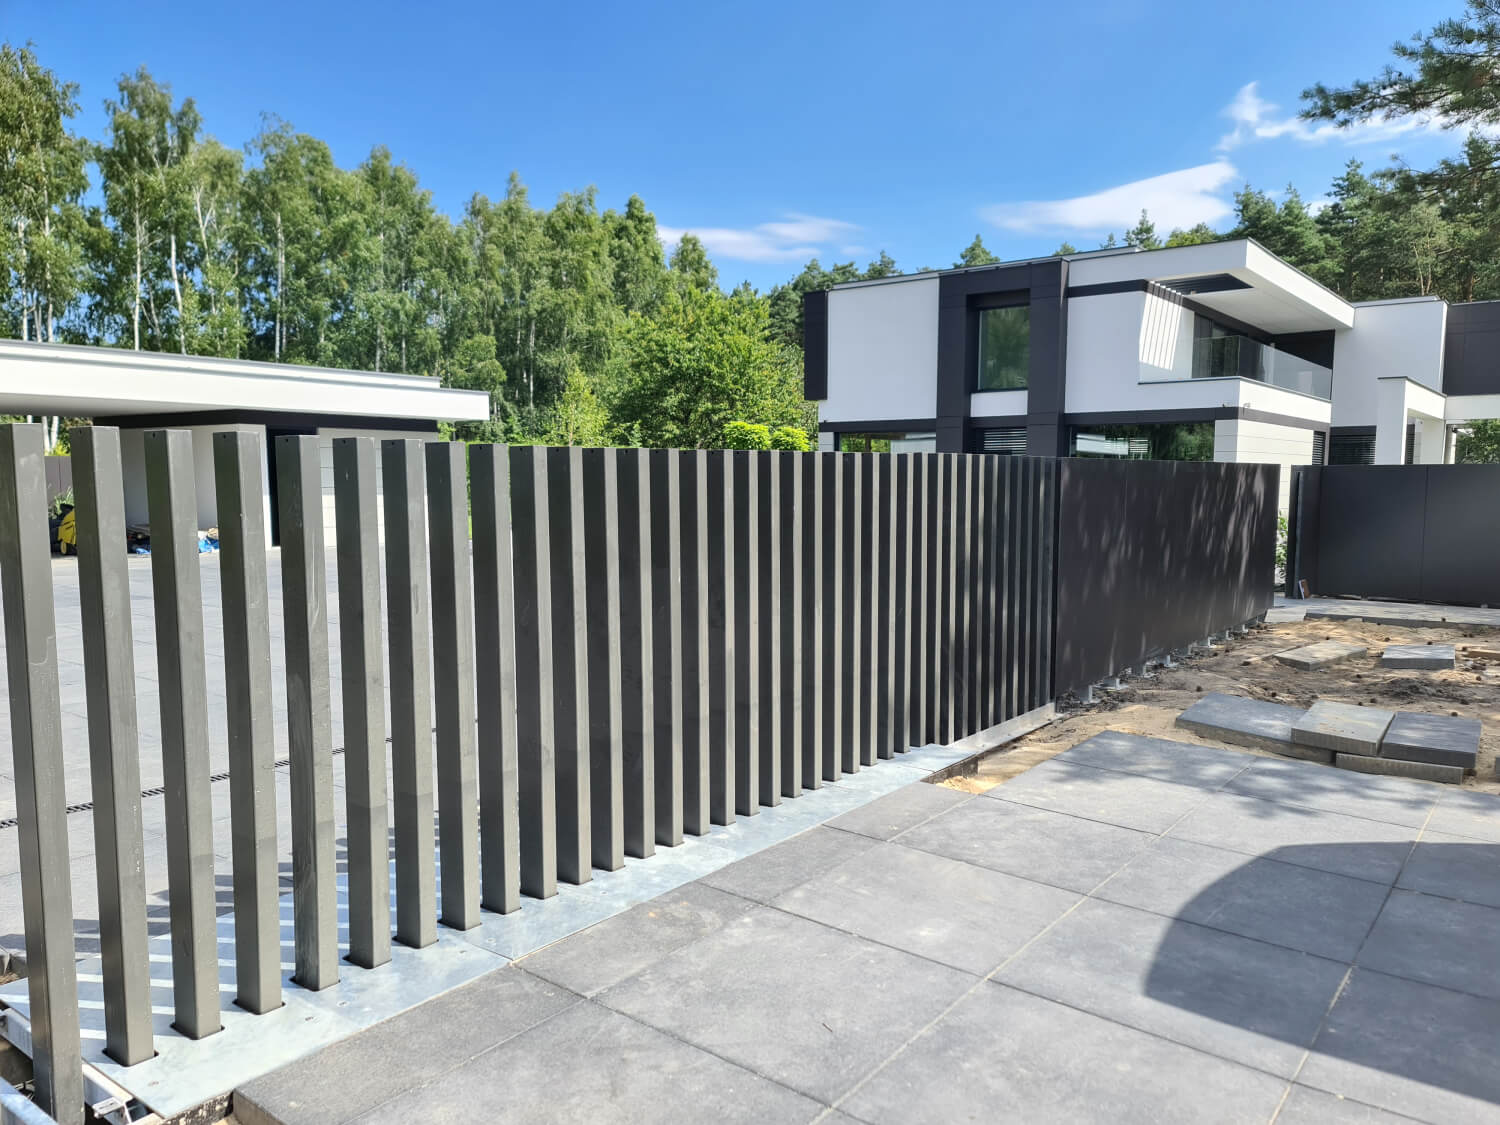 Electric retractable fence